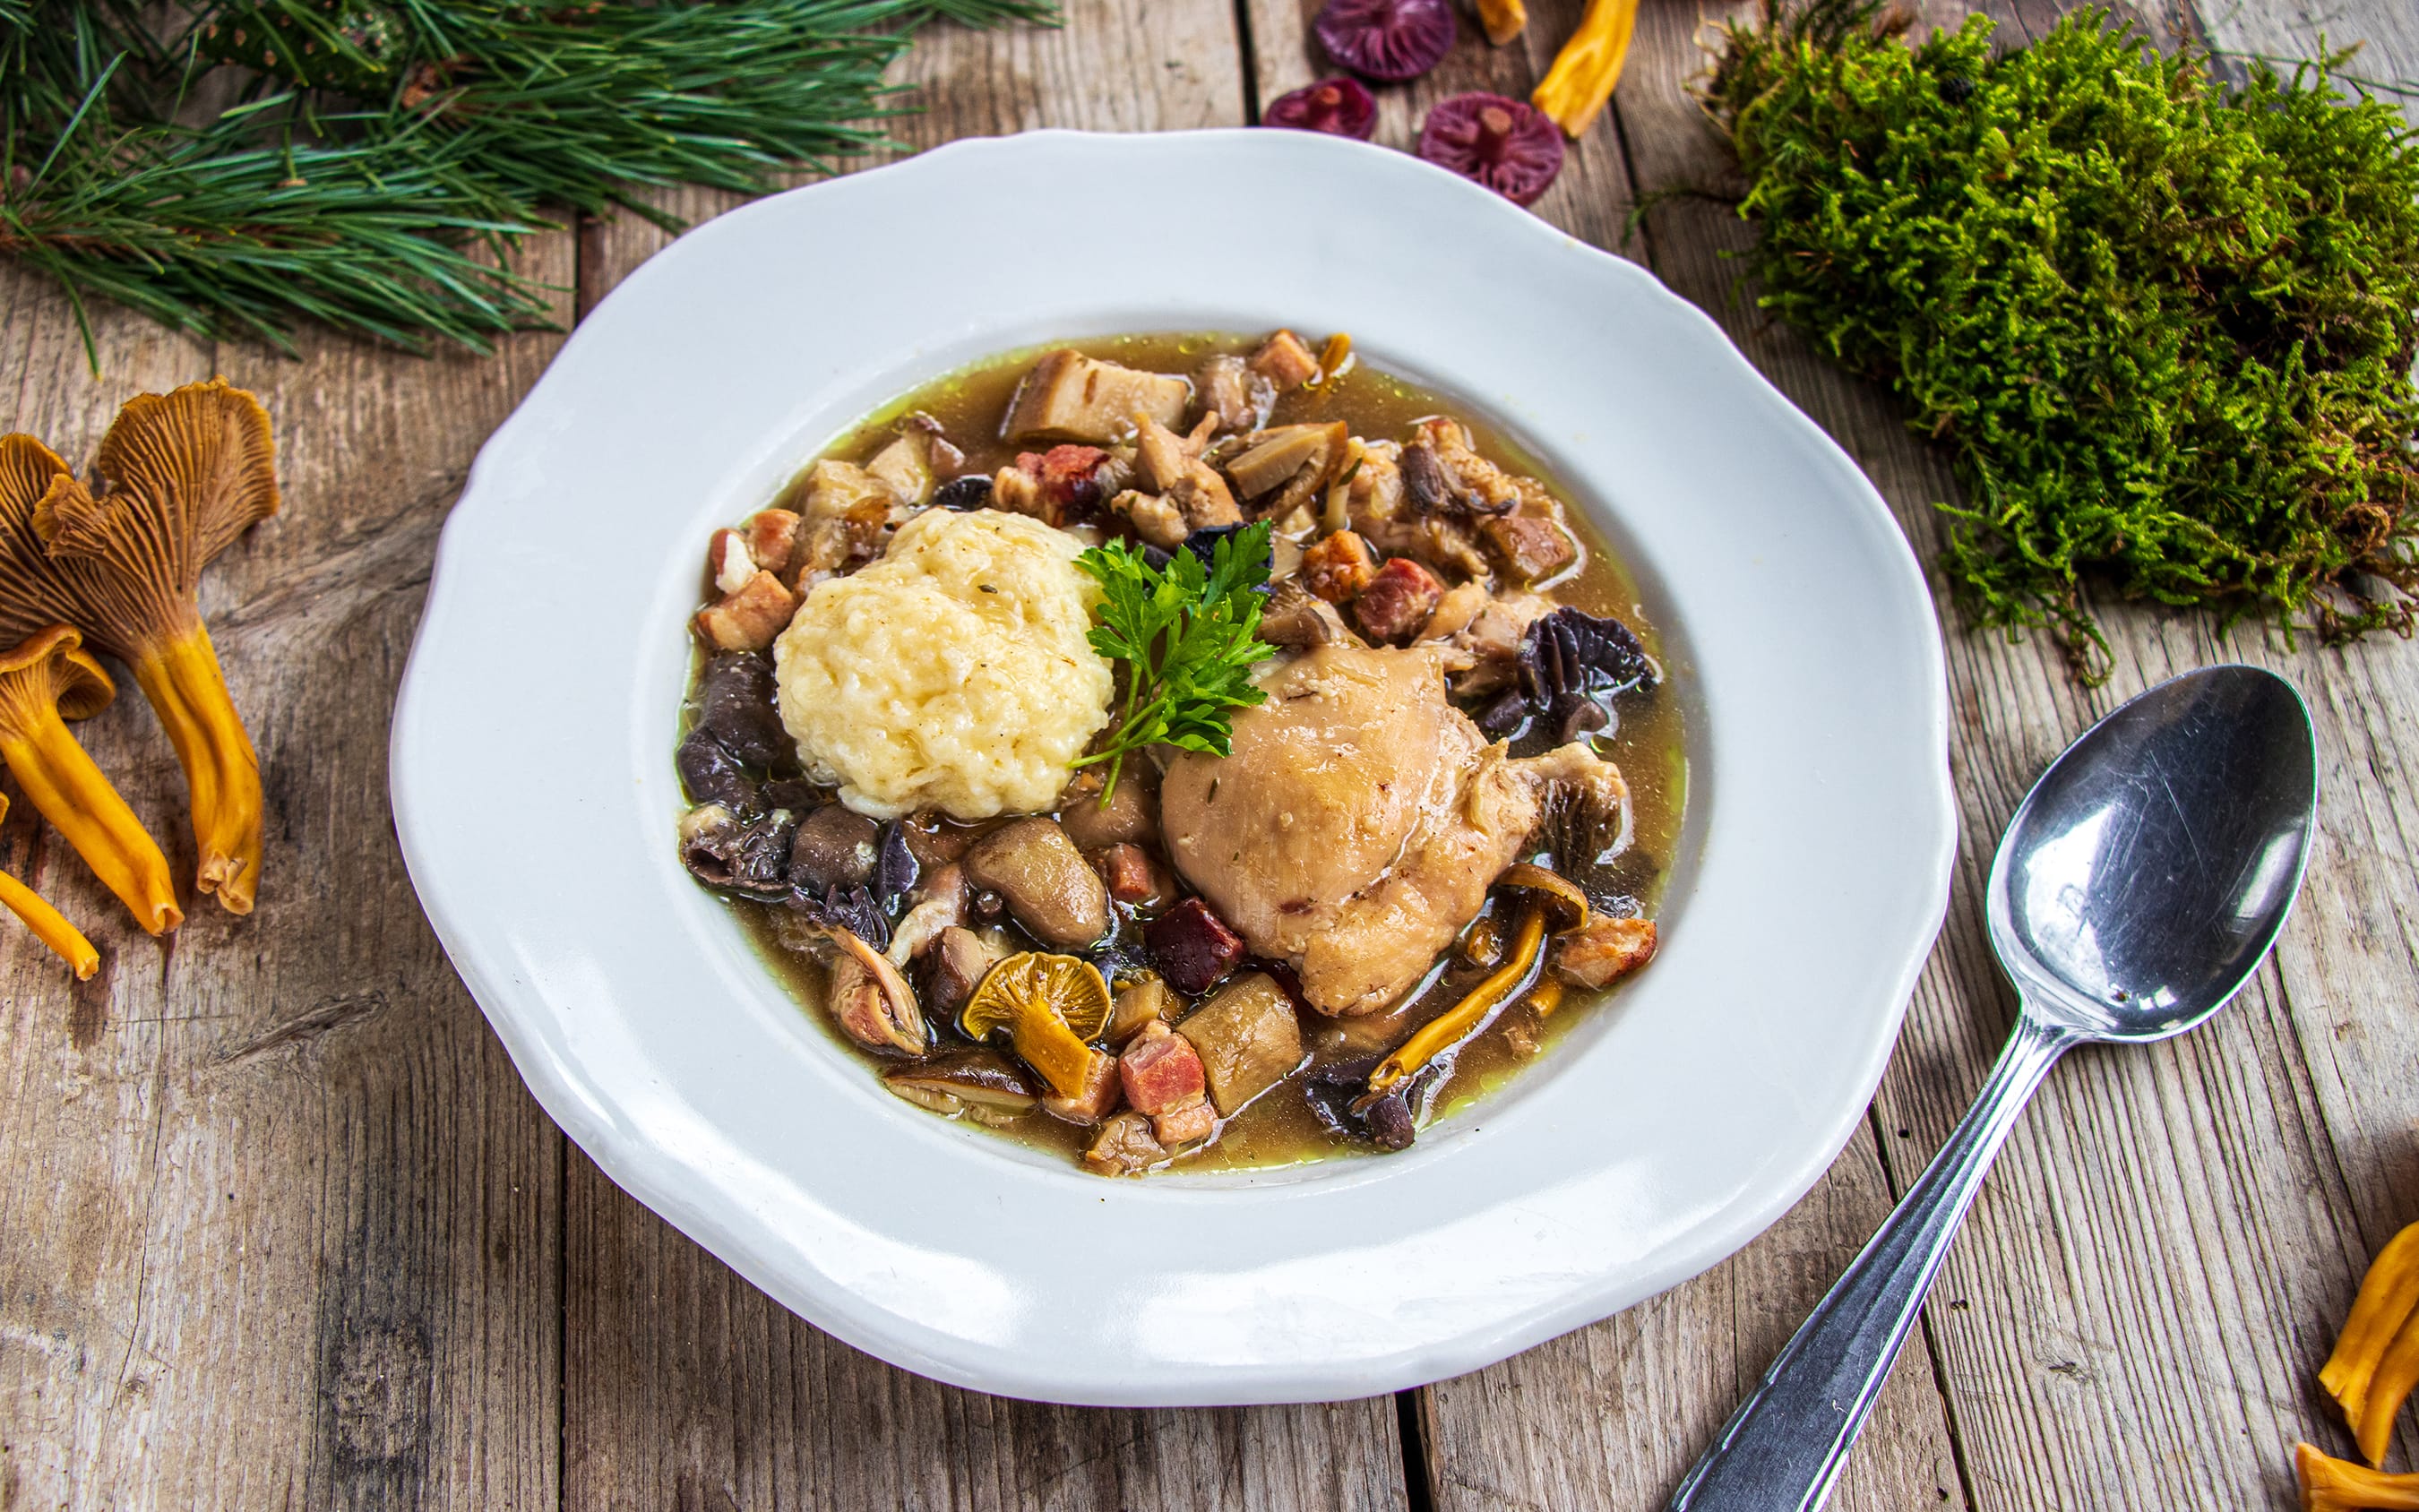 Chicken and Dumplings with Wild Mushrooms | Recipe by FUNGIWOMAN